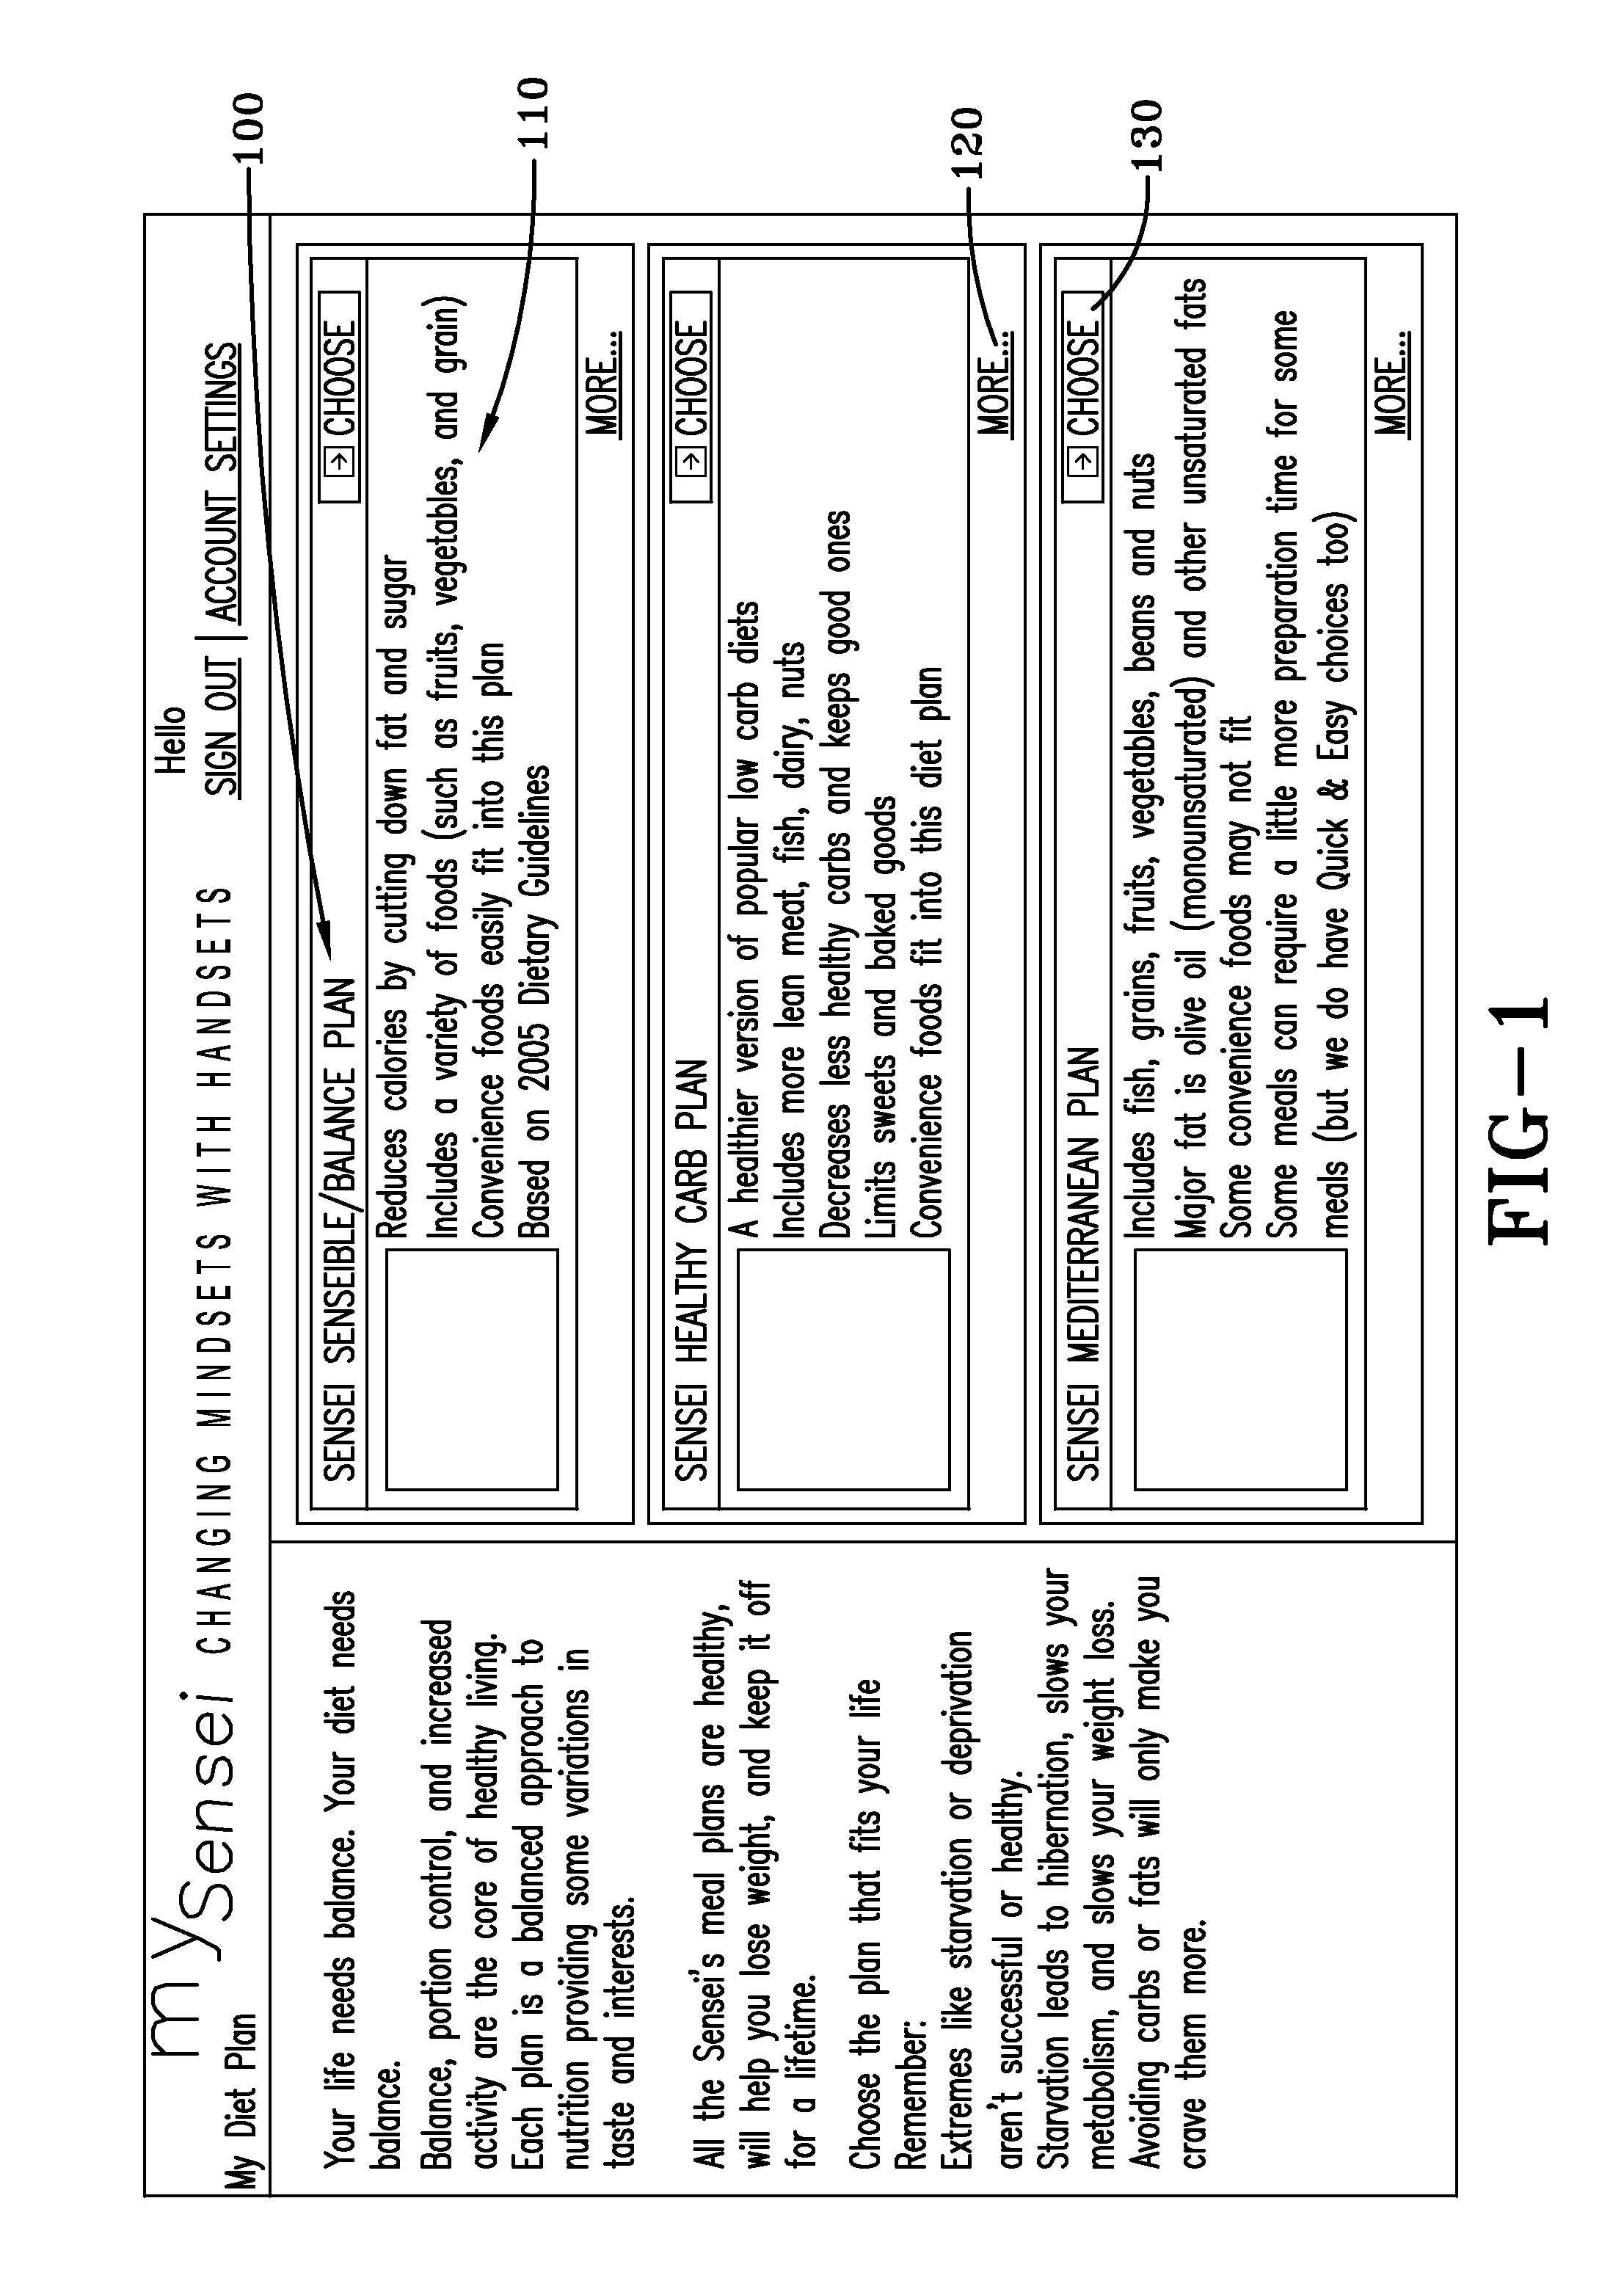 System and method for automatically defining, creating, and managing meals